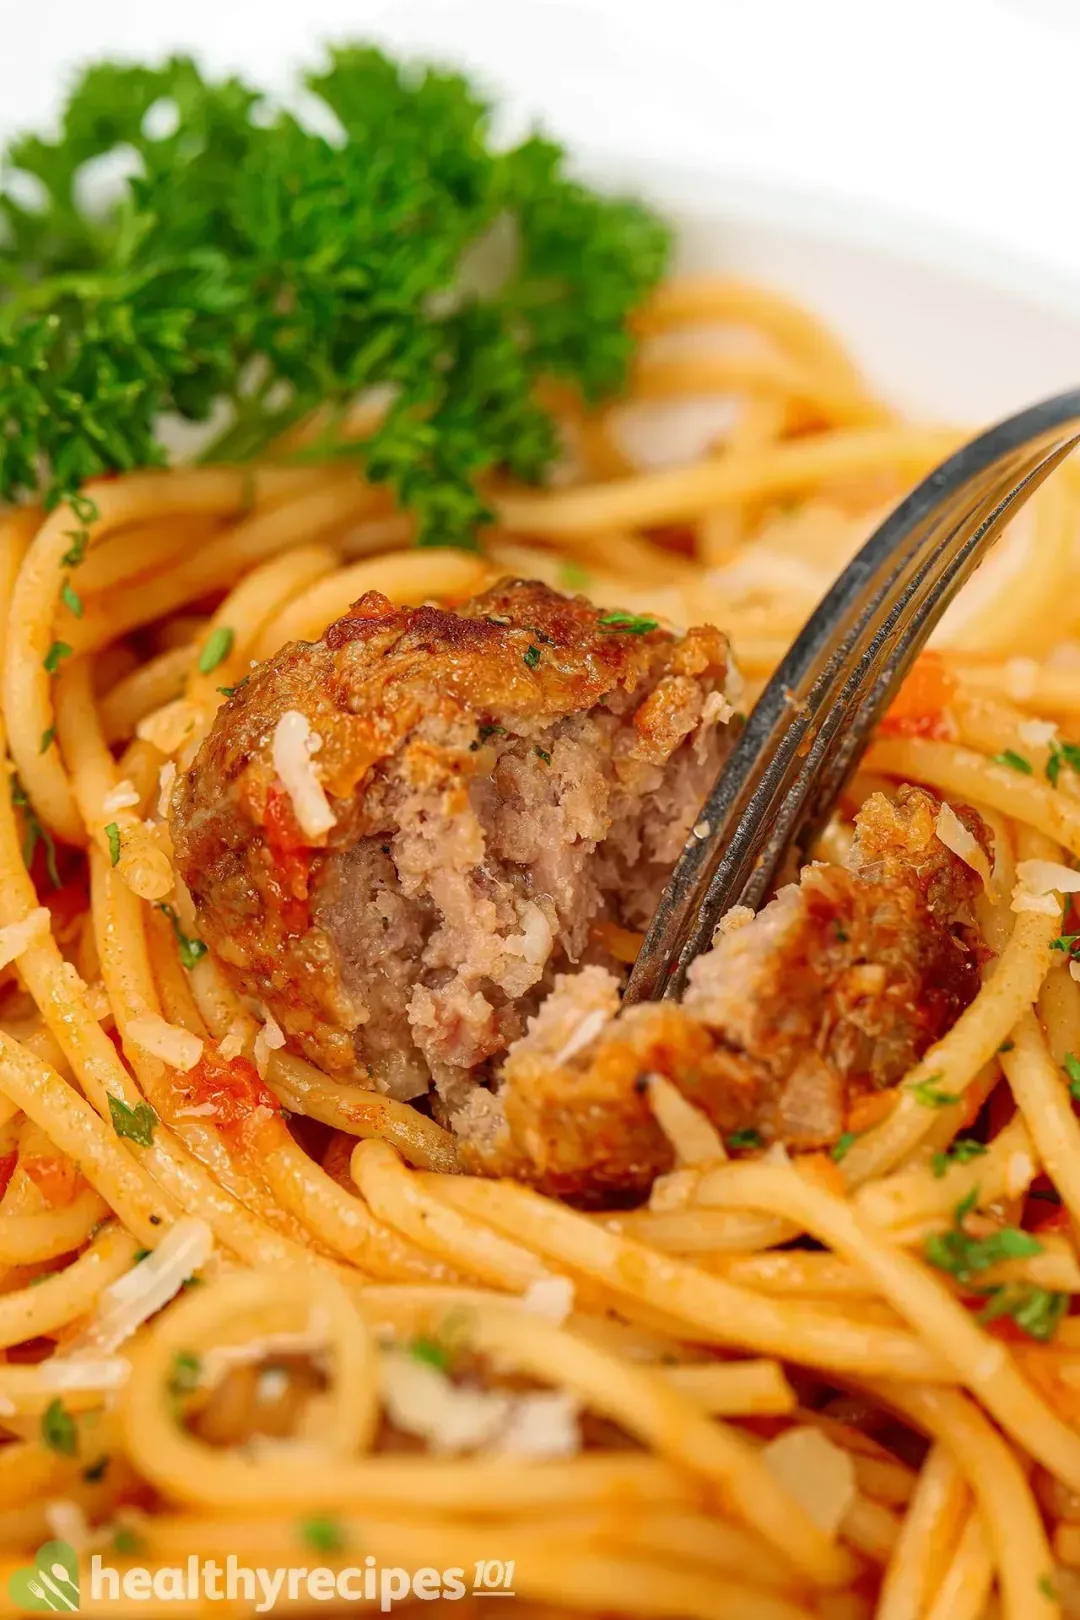 Is Spaghetti and Meatballs Healthy